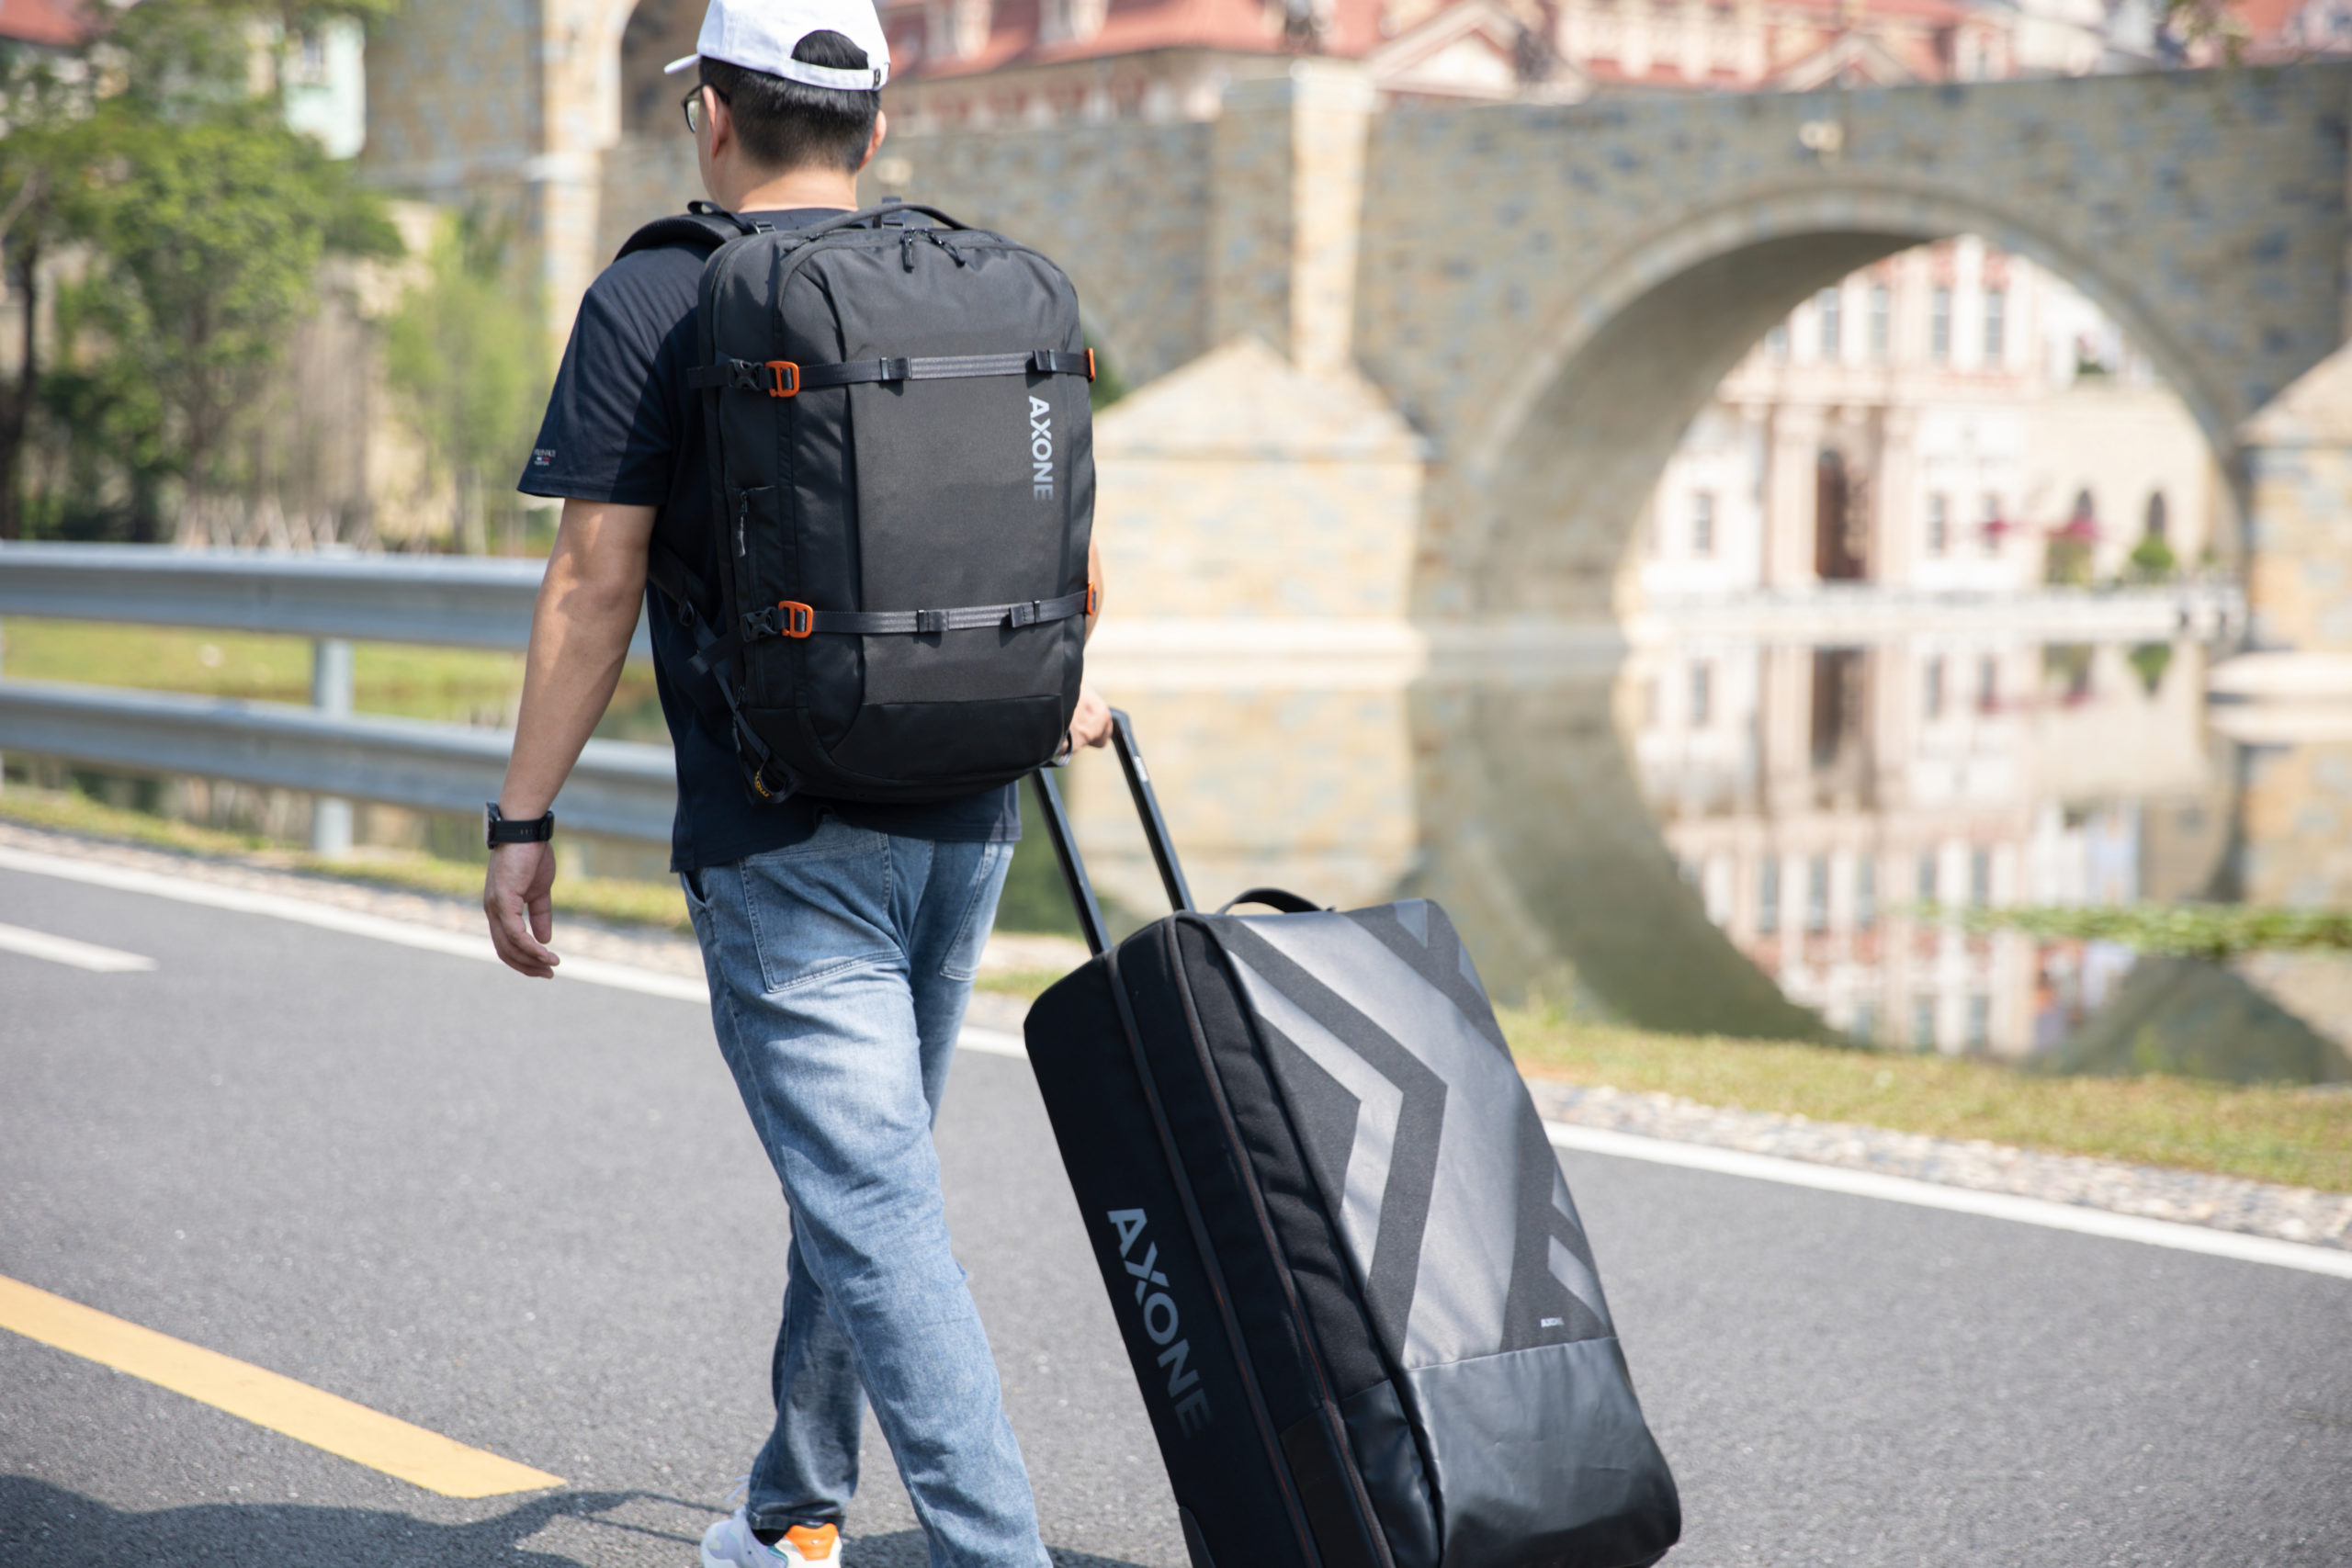 AXONE Debuts Their Innovative new Travel Line